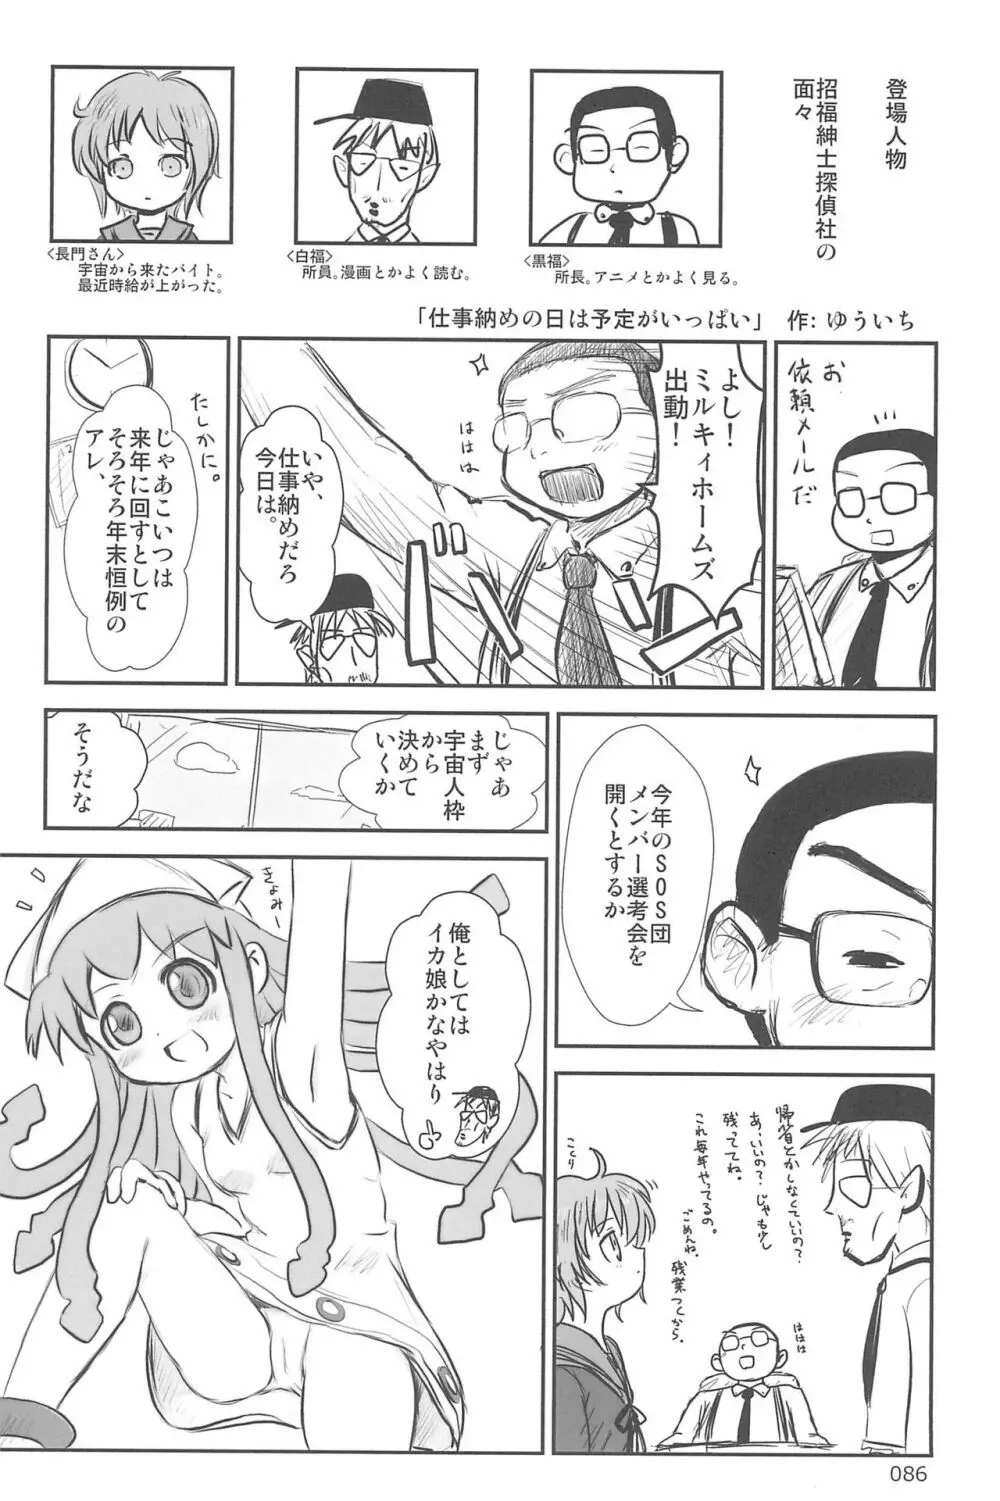 ND-special Volume 6 86ページ